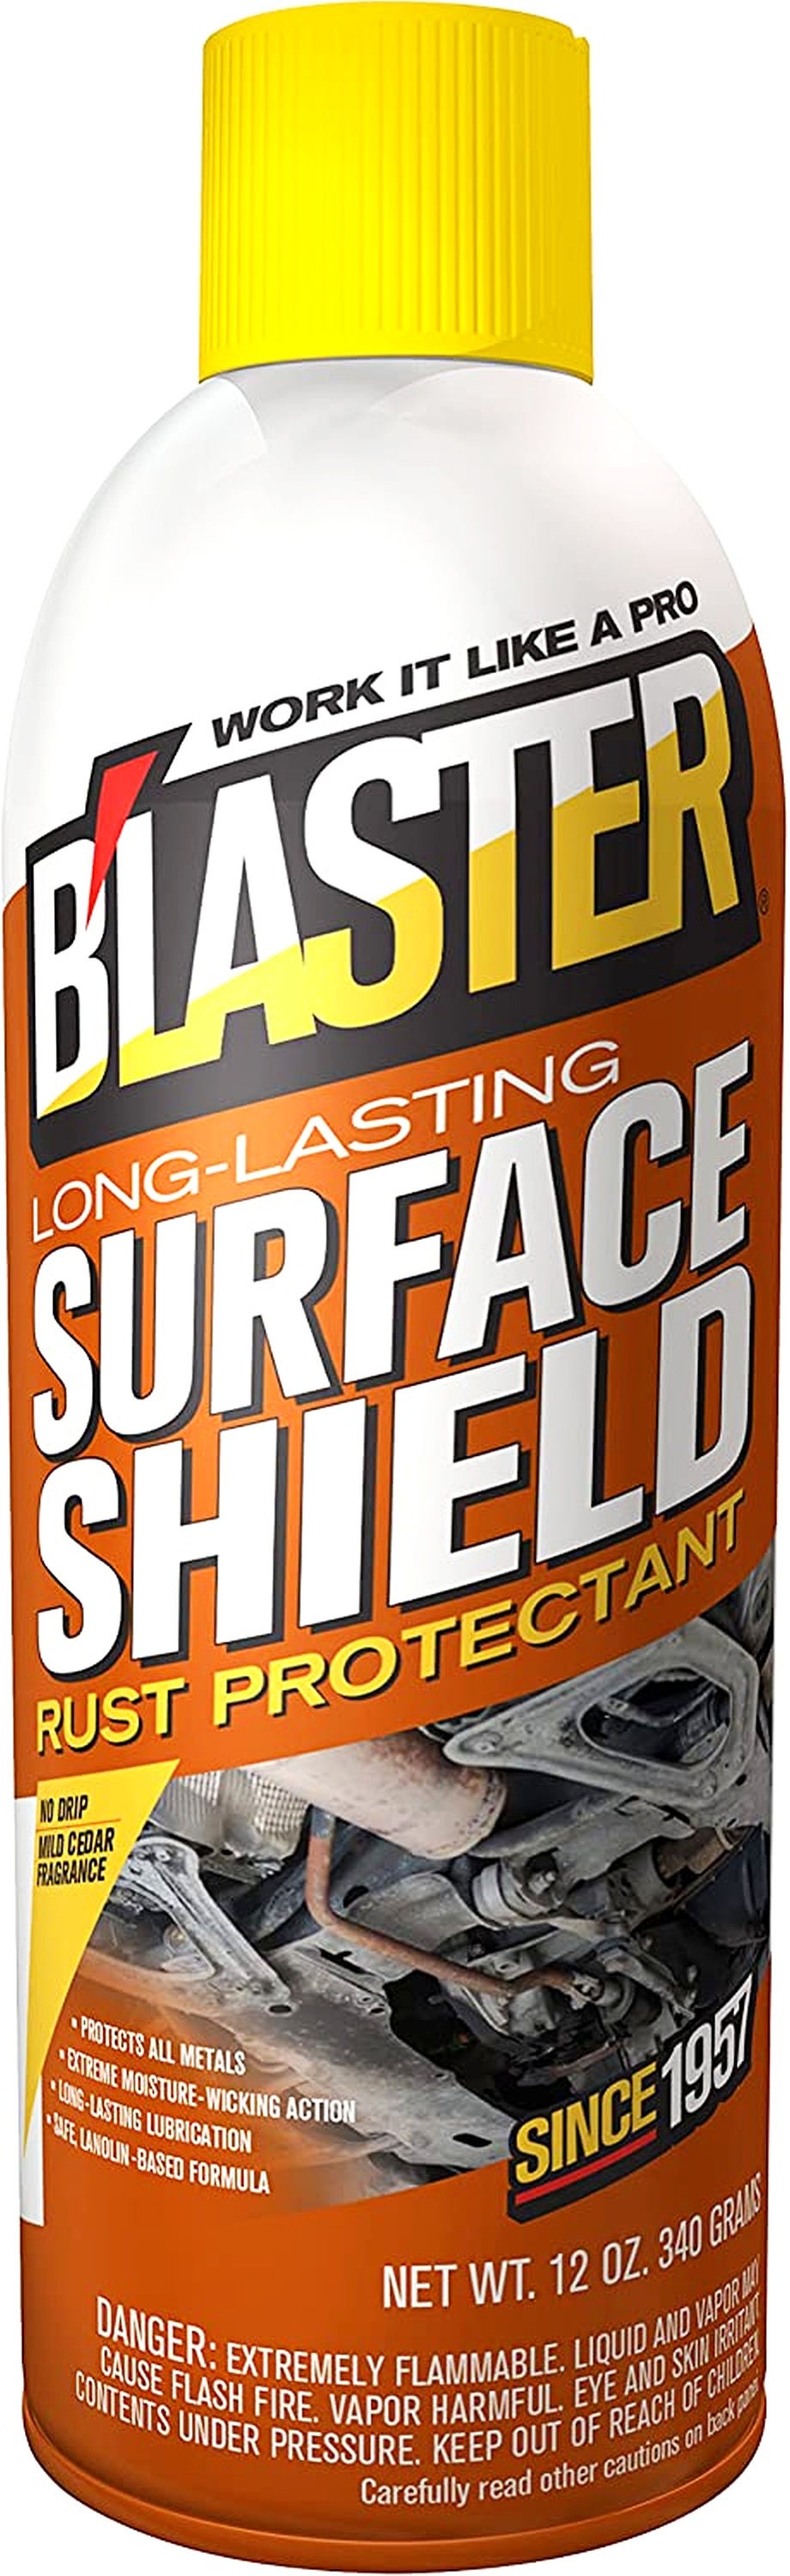 ProtectaClear 4 Oz. Clear, Protective Coating for High-Touch Metal